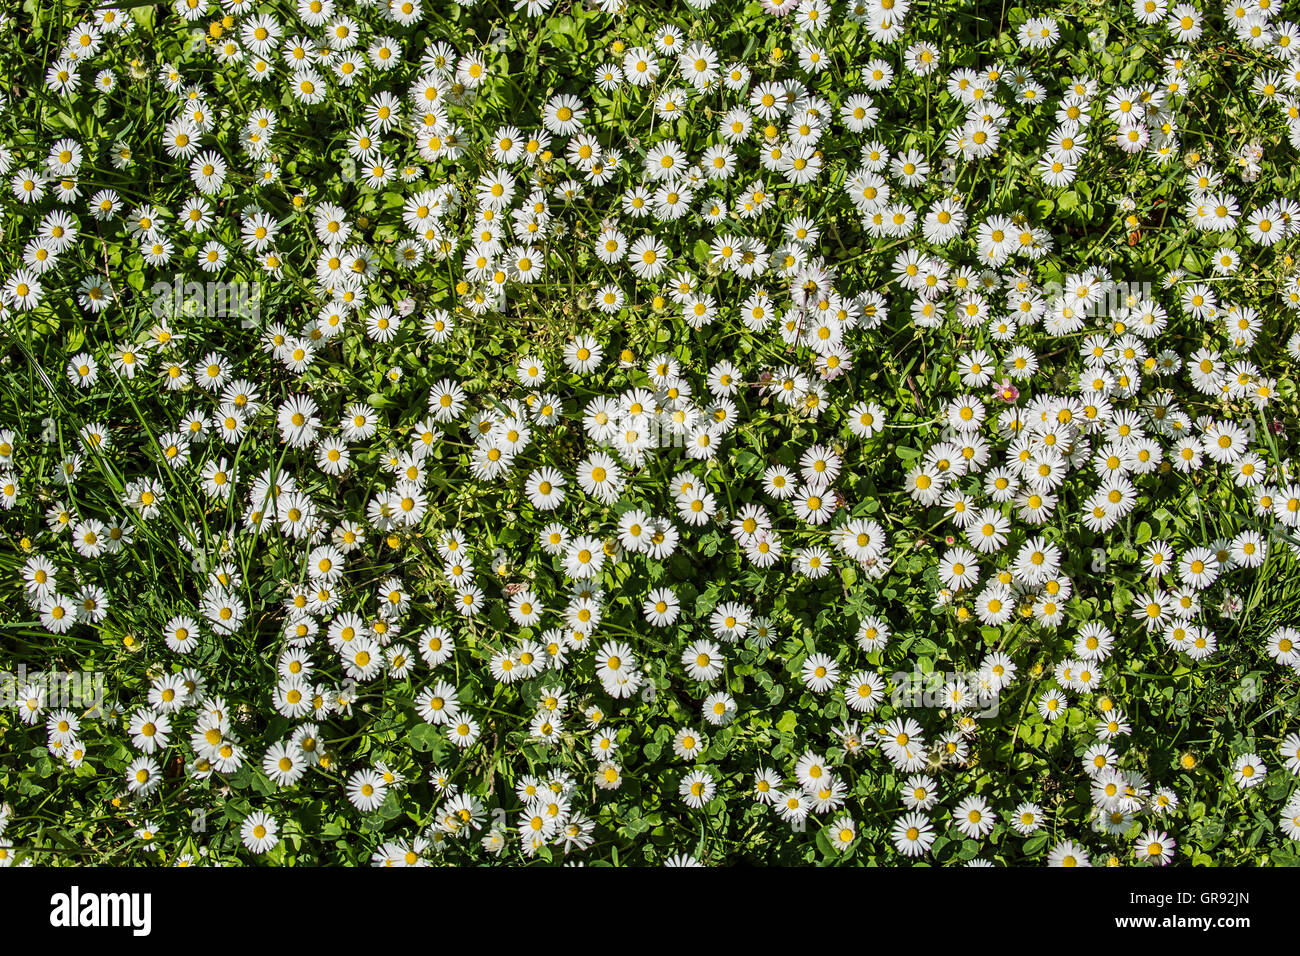 Many Flowering Daisies Photographed From Above, Bellis Perennis Stock Photo